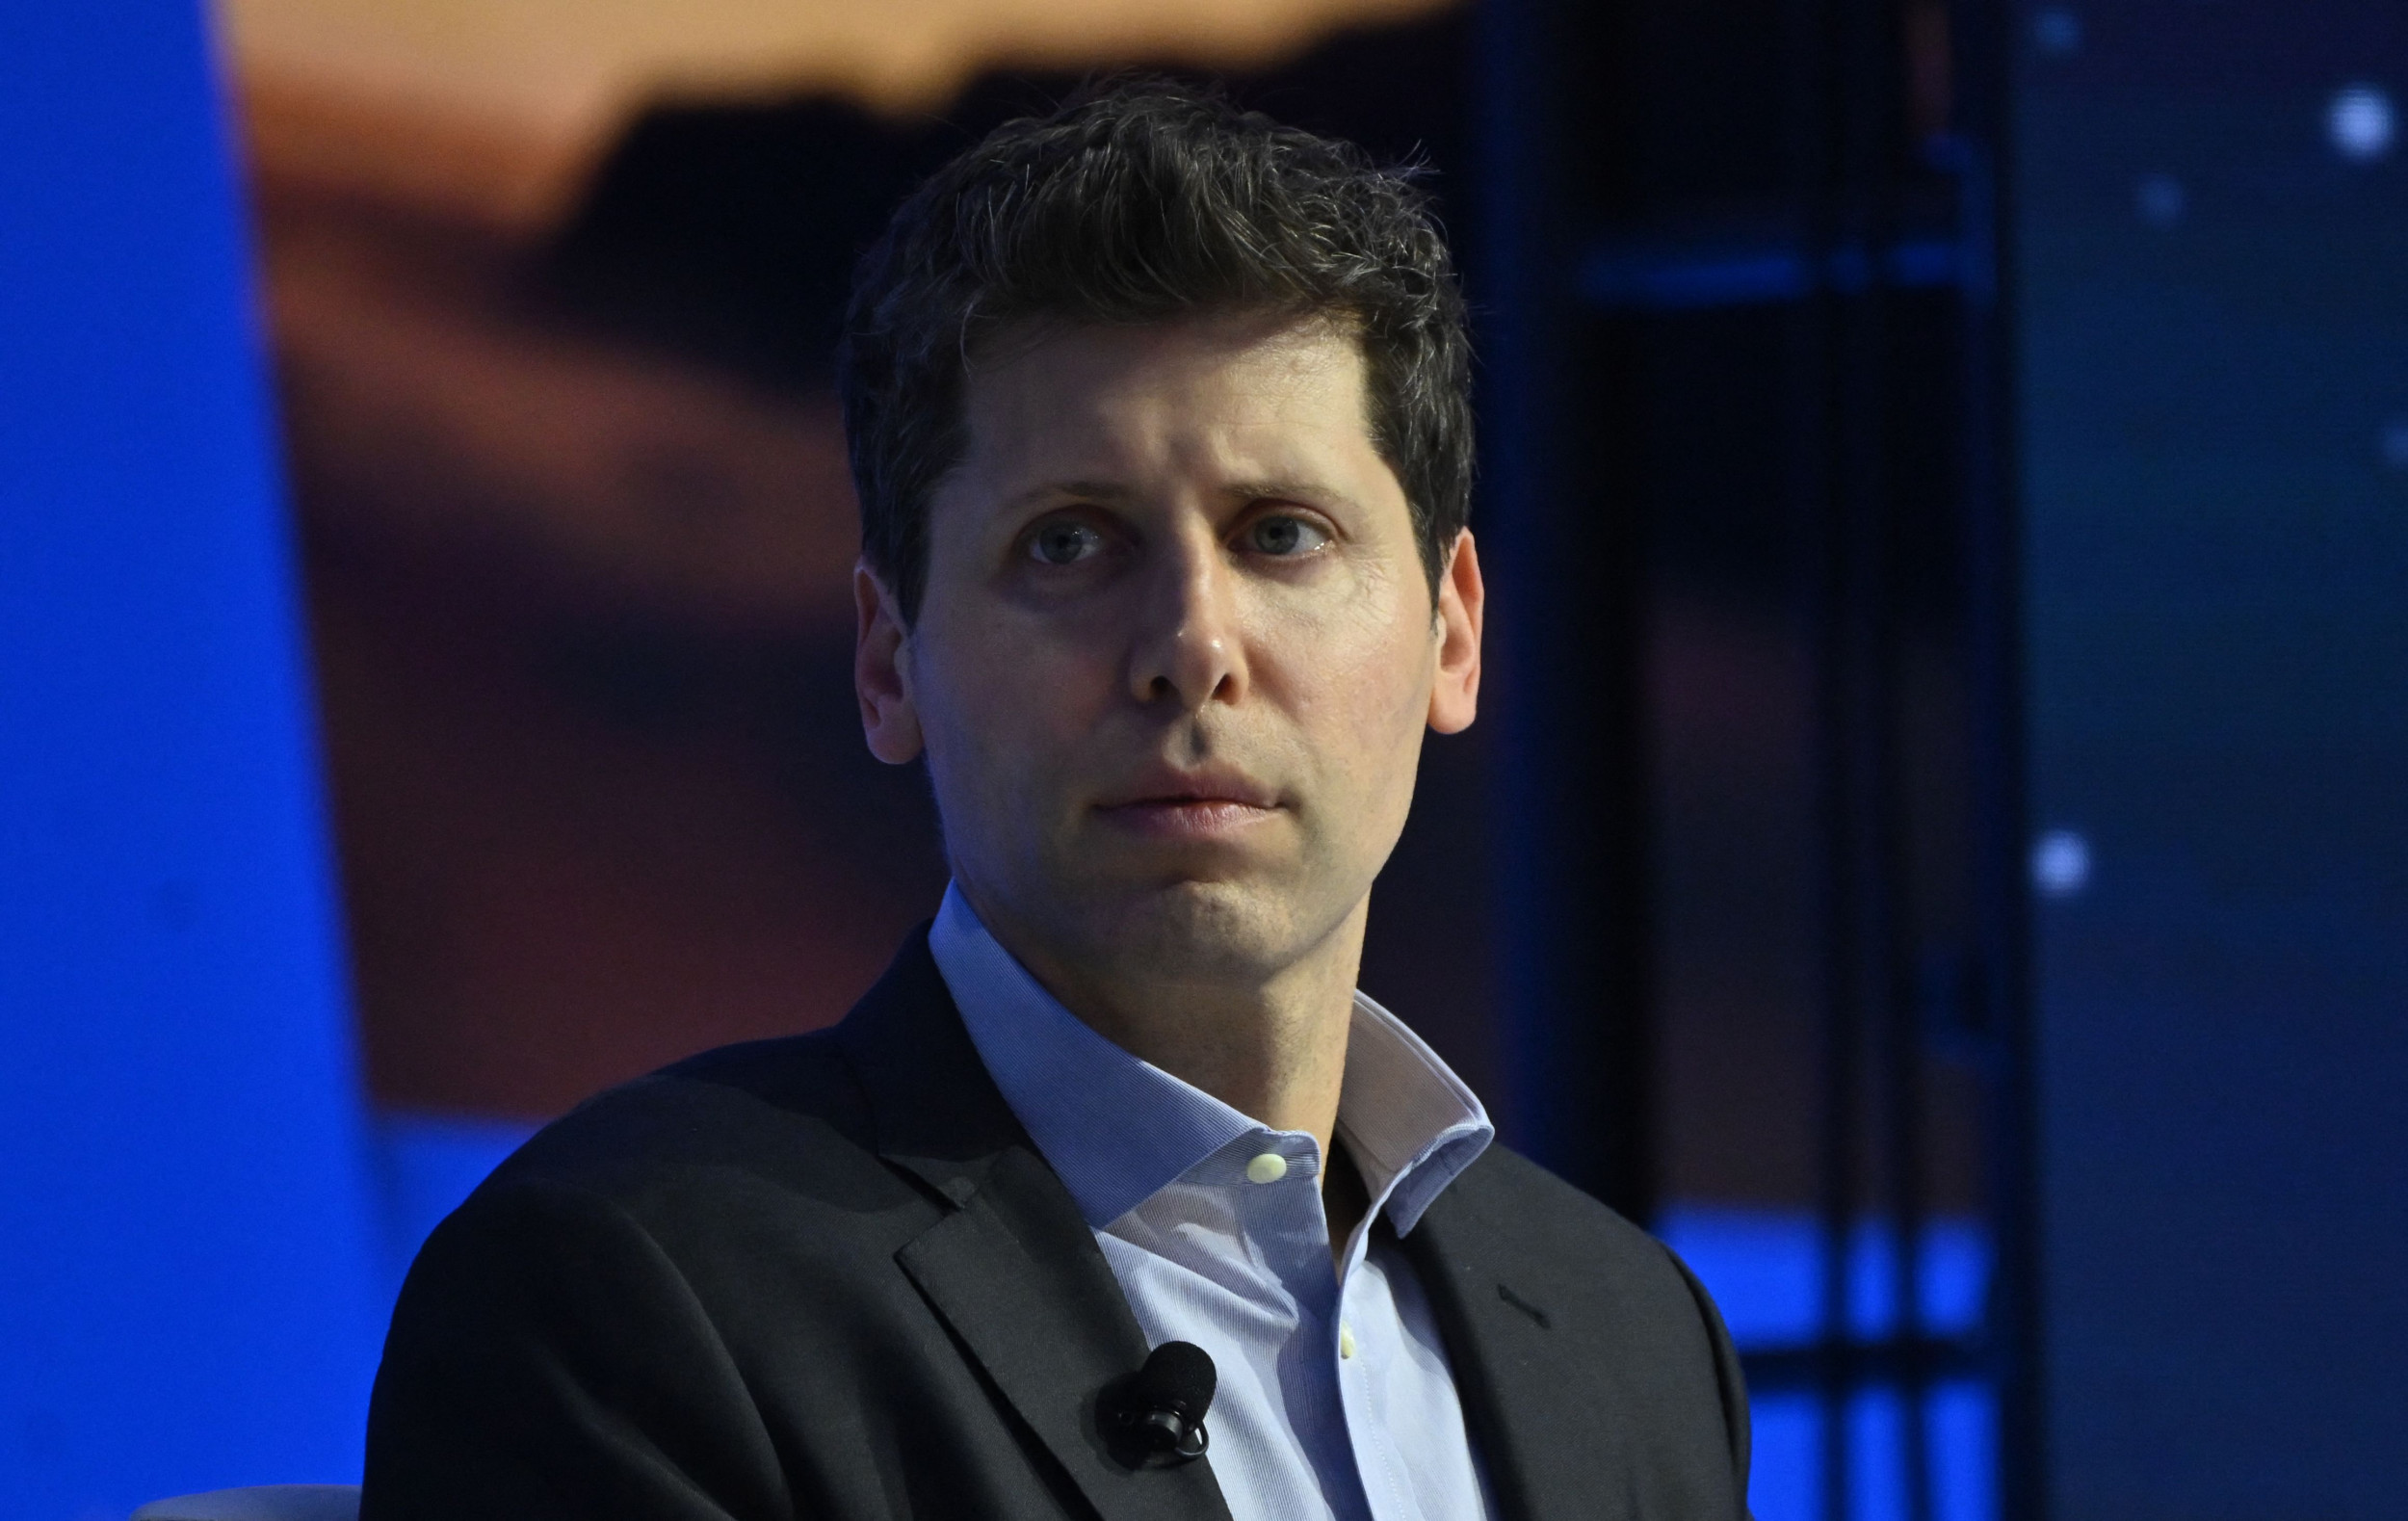 Sam Altman reacts to ouster from OpenAI - Newsweek